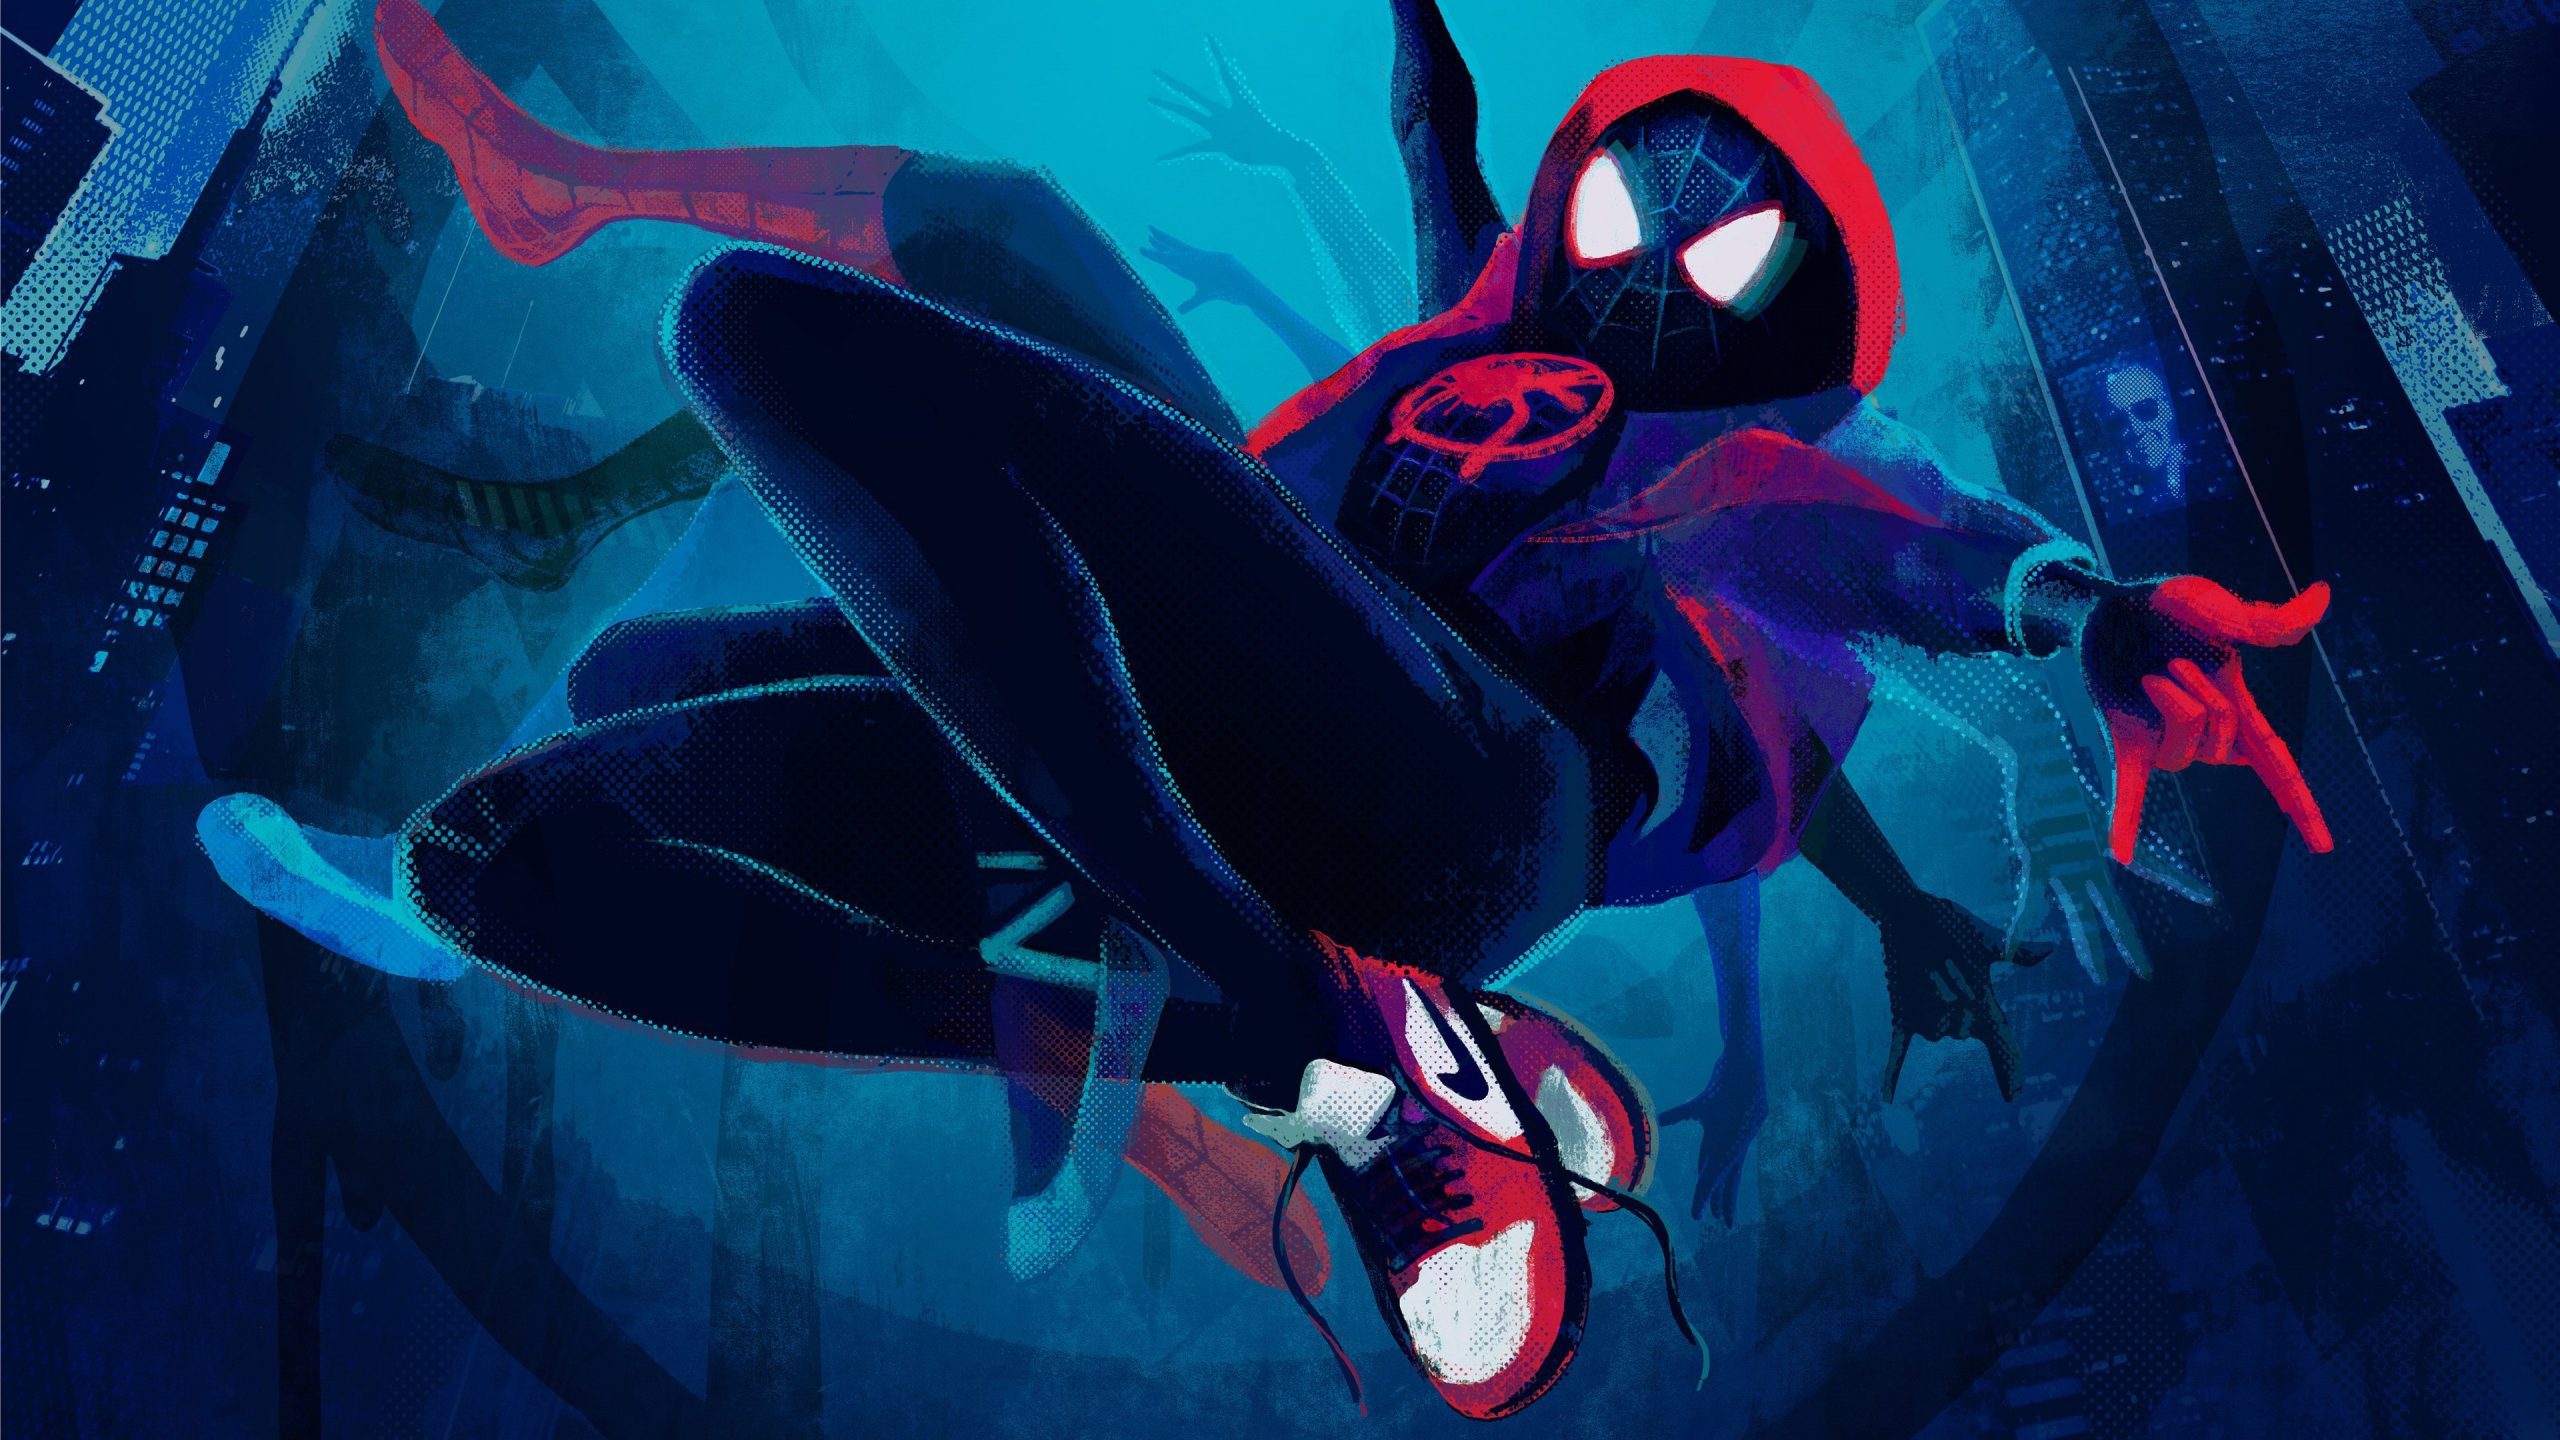 download into the spider verse 2